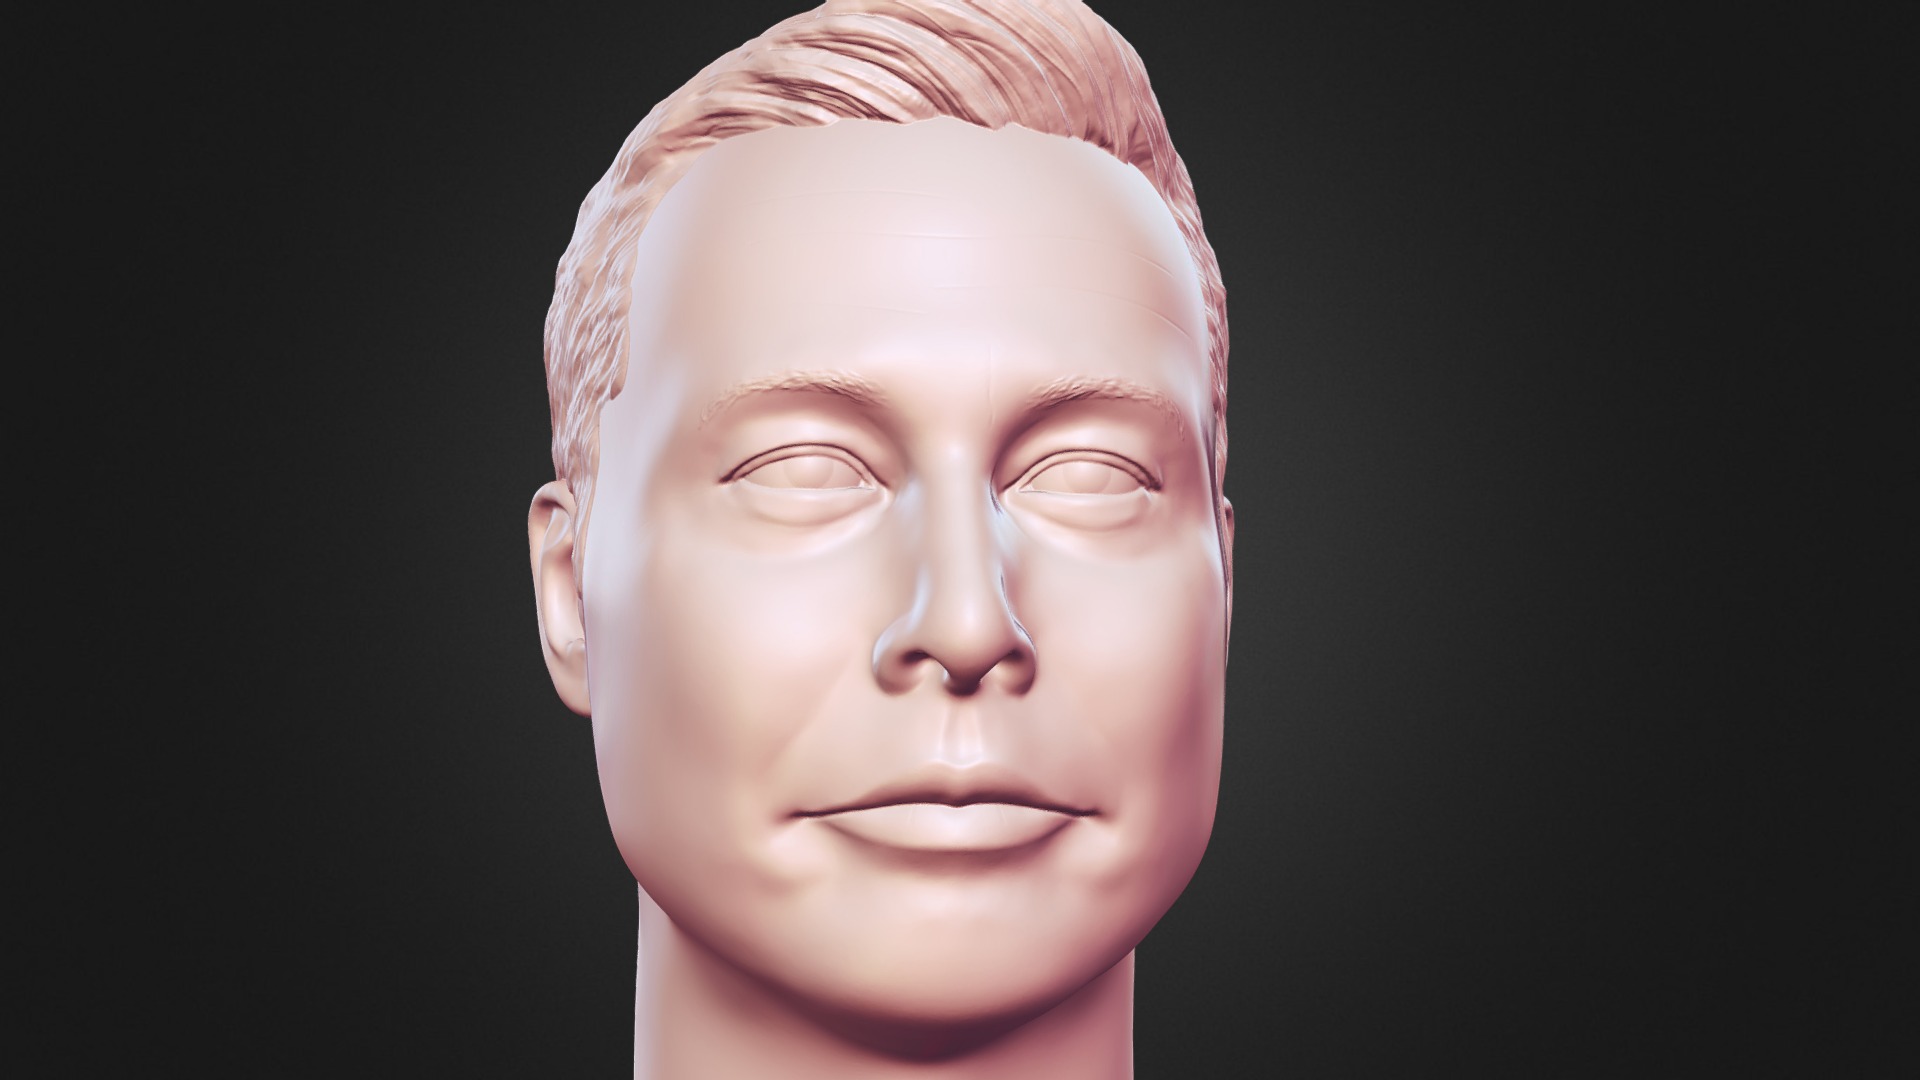 3D model Elon Musk 3d Printable portrait sculpture - This is a 3D model of the Elon Musk 3d Printable portrait sculpture. The 3D model is about a person with red hair.